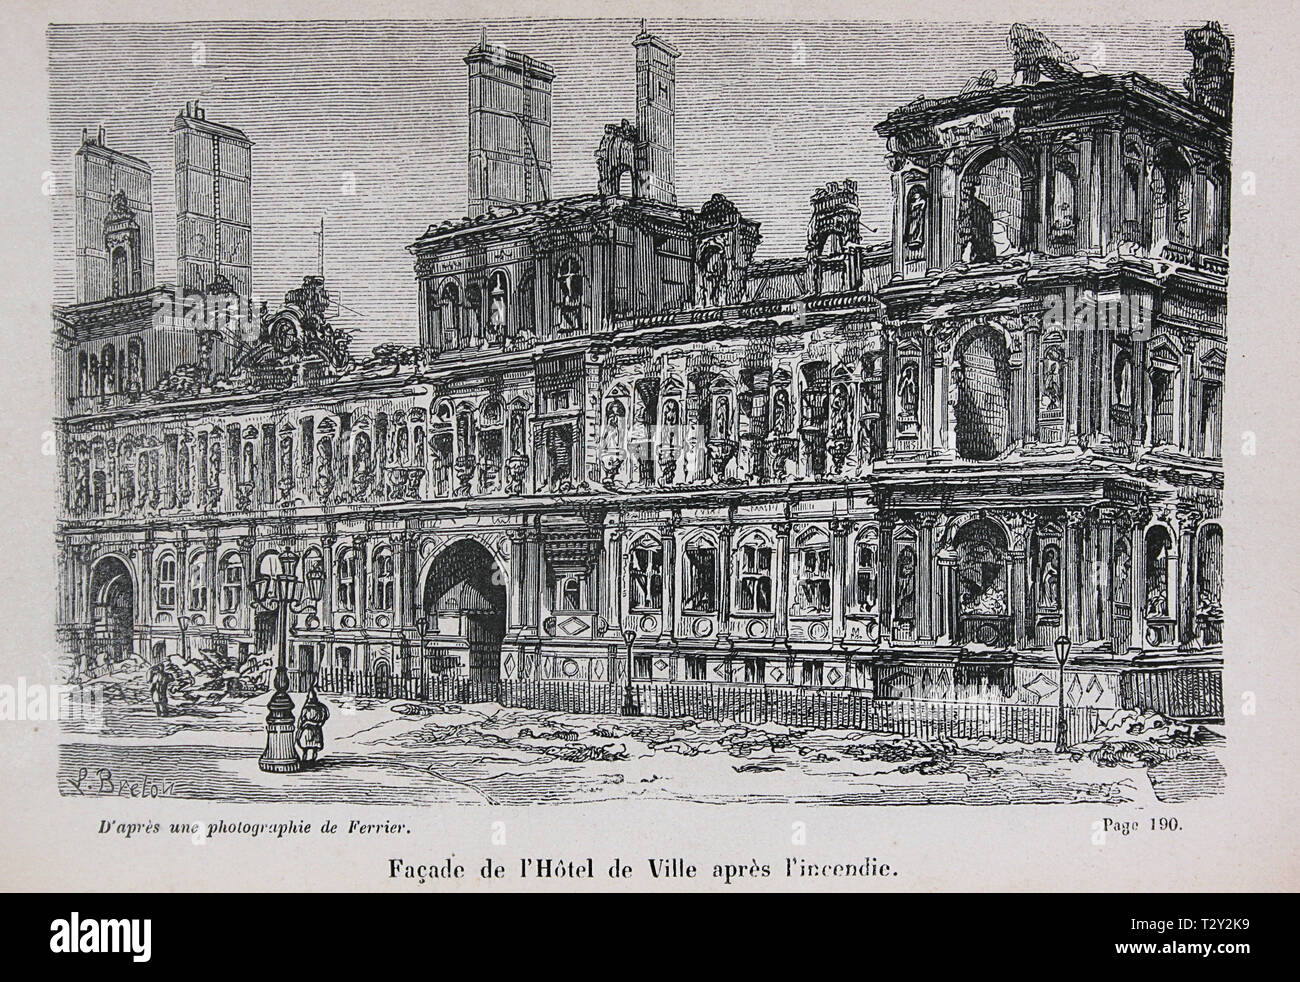 The facade of the Hotel de Ville in Paris after the fire during the Paris Commune 1871. Engraving after a photograph. Stock Photo